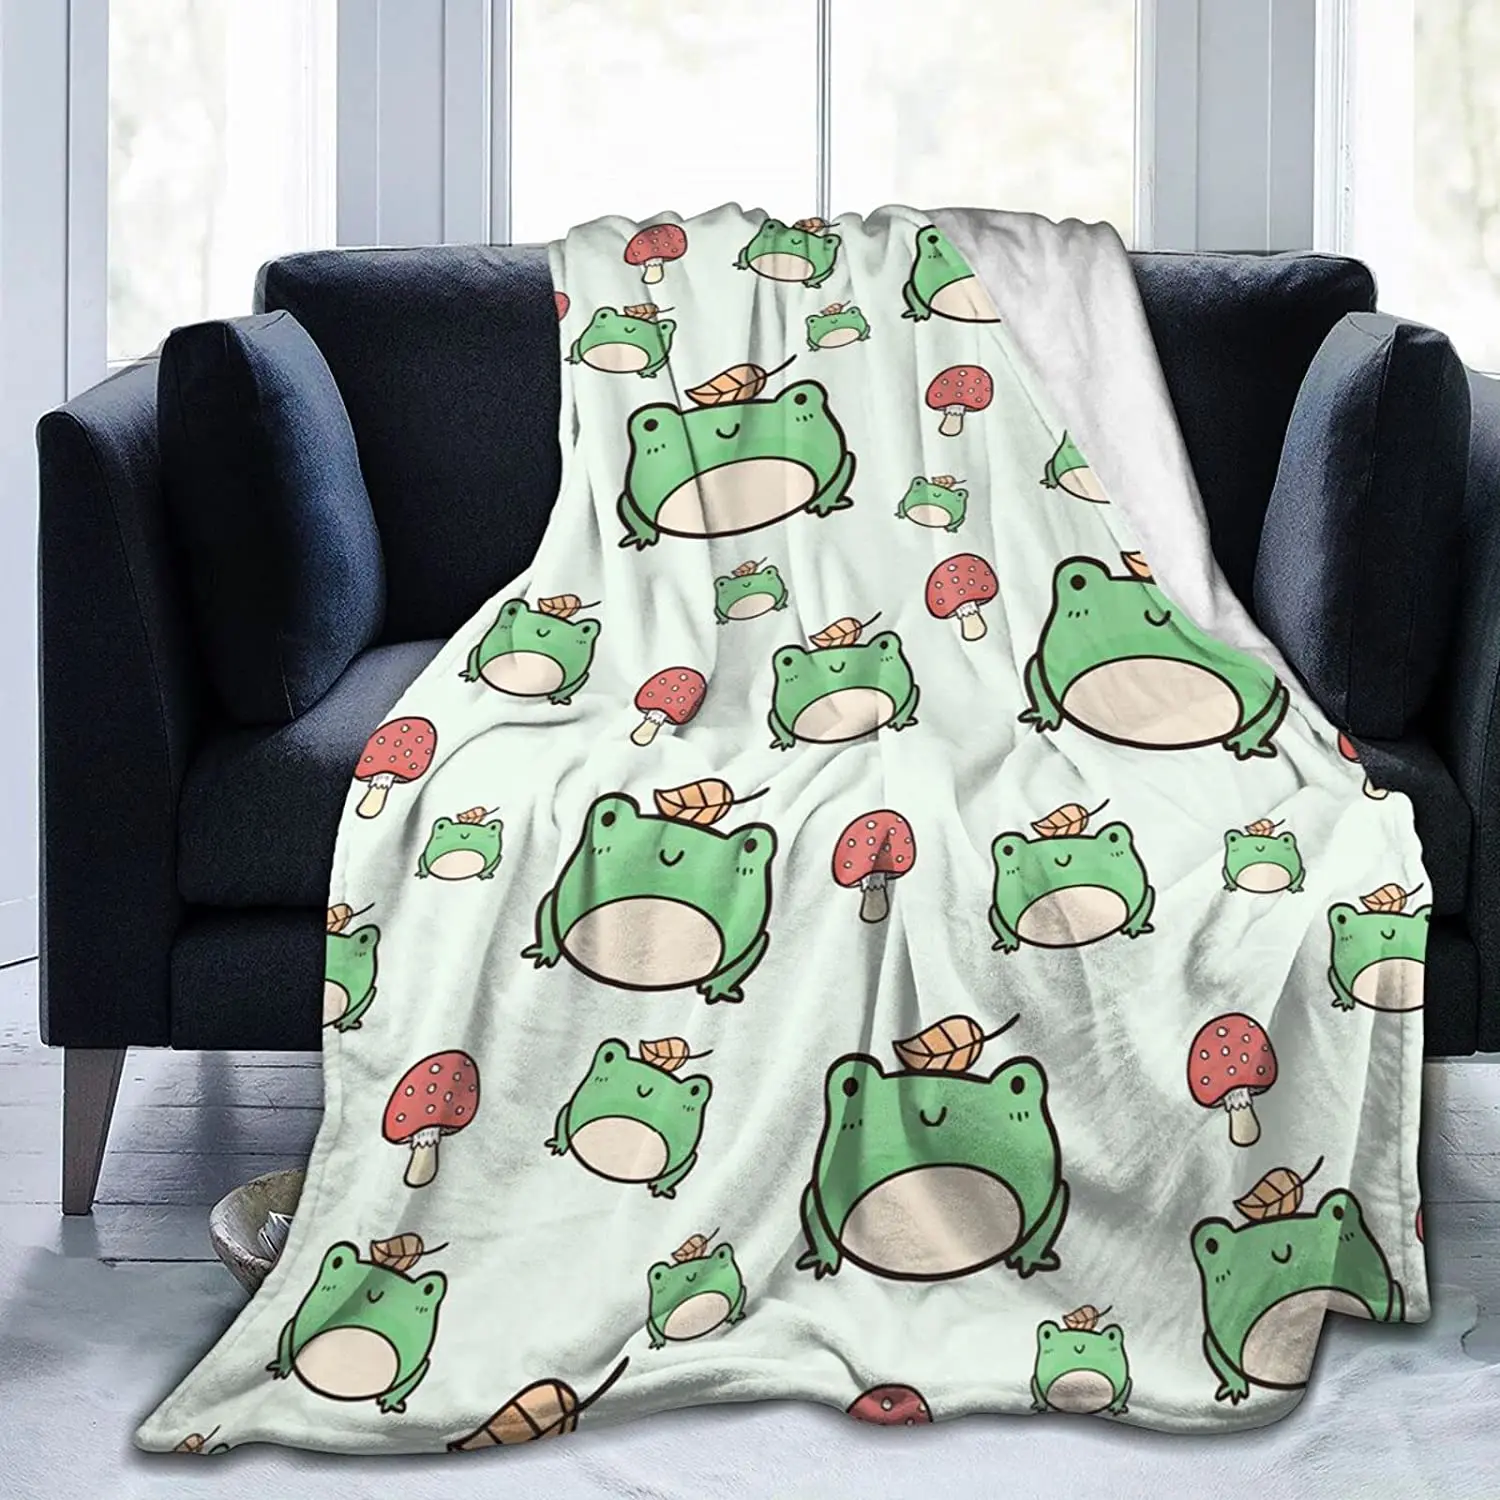 

Cute Green Frog Blanket Soft Thin Flannel Blanket Fluffy Cozy Fuzzy Throws Non-Shedding for Nap Bed Sofa Couch Home Decor